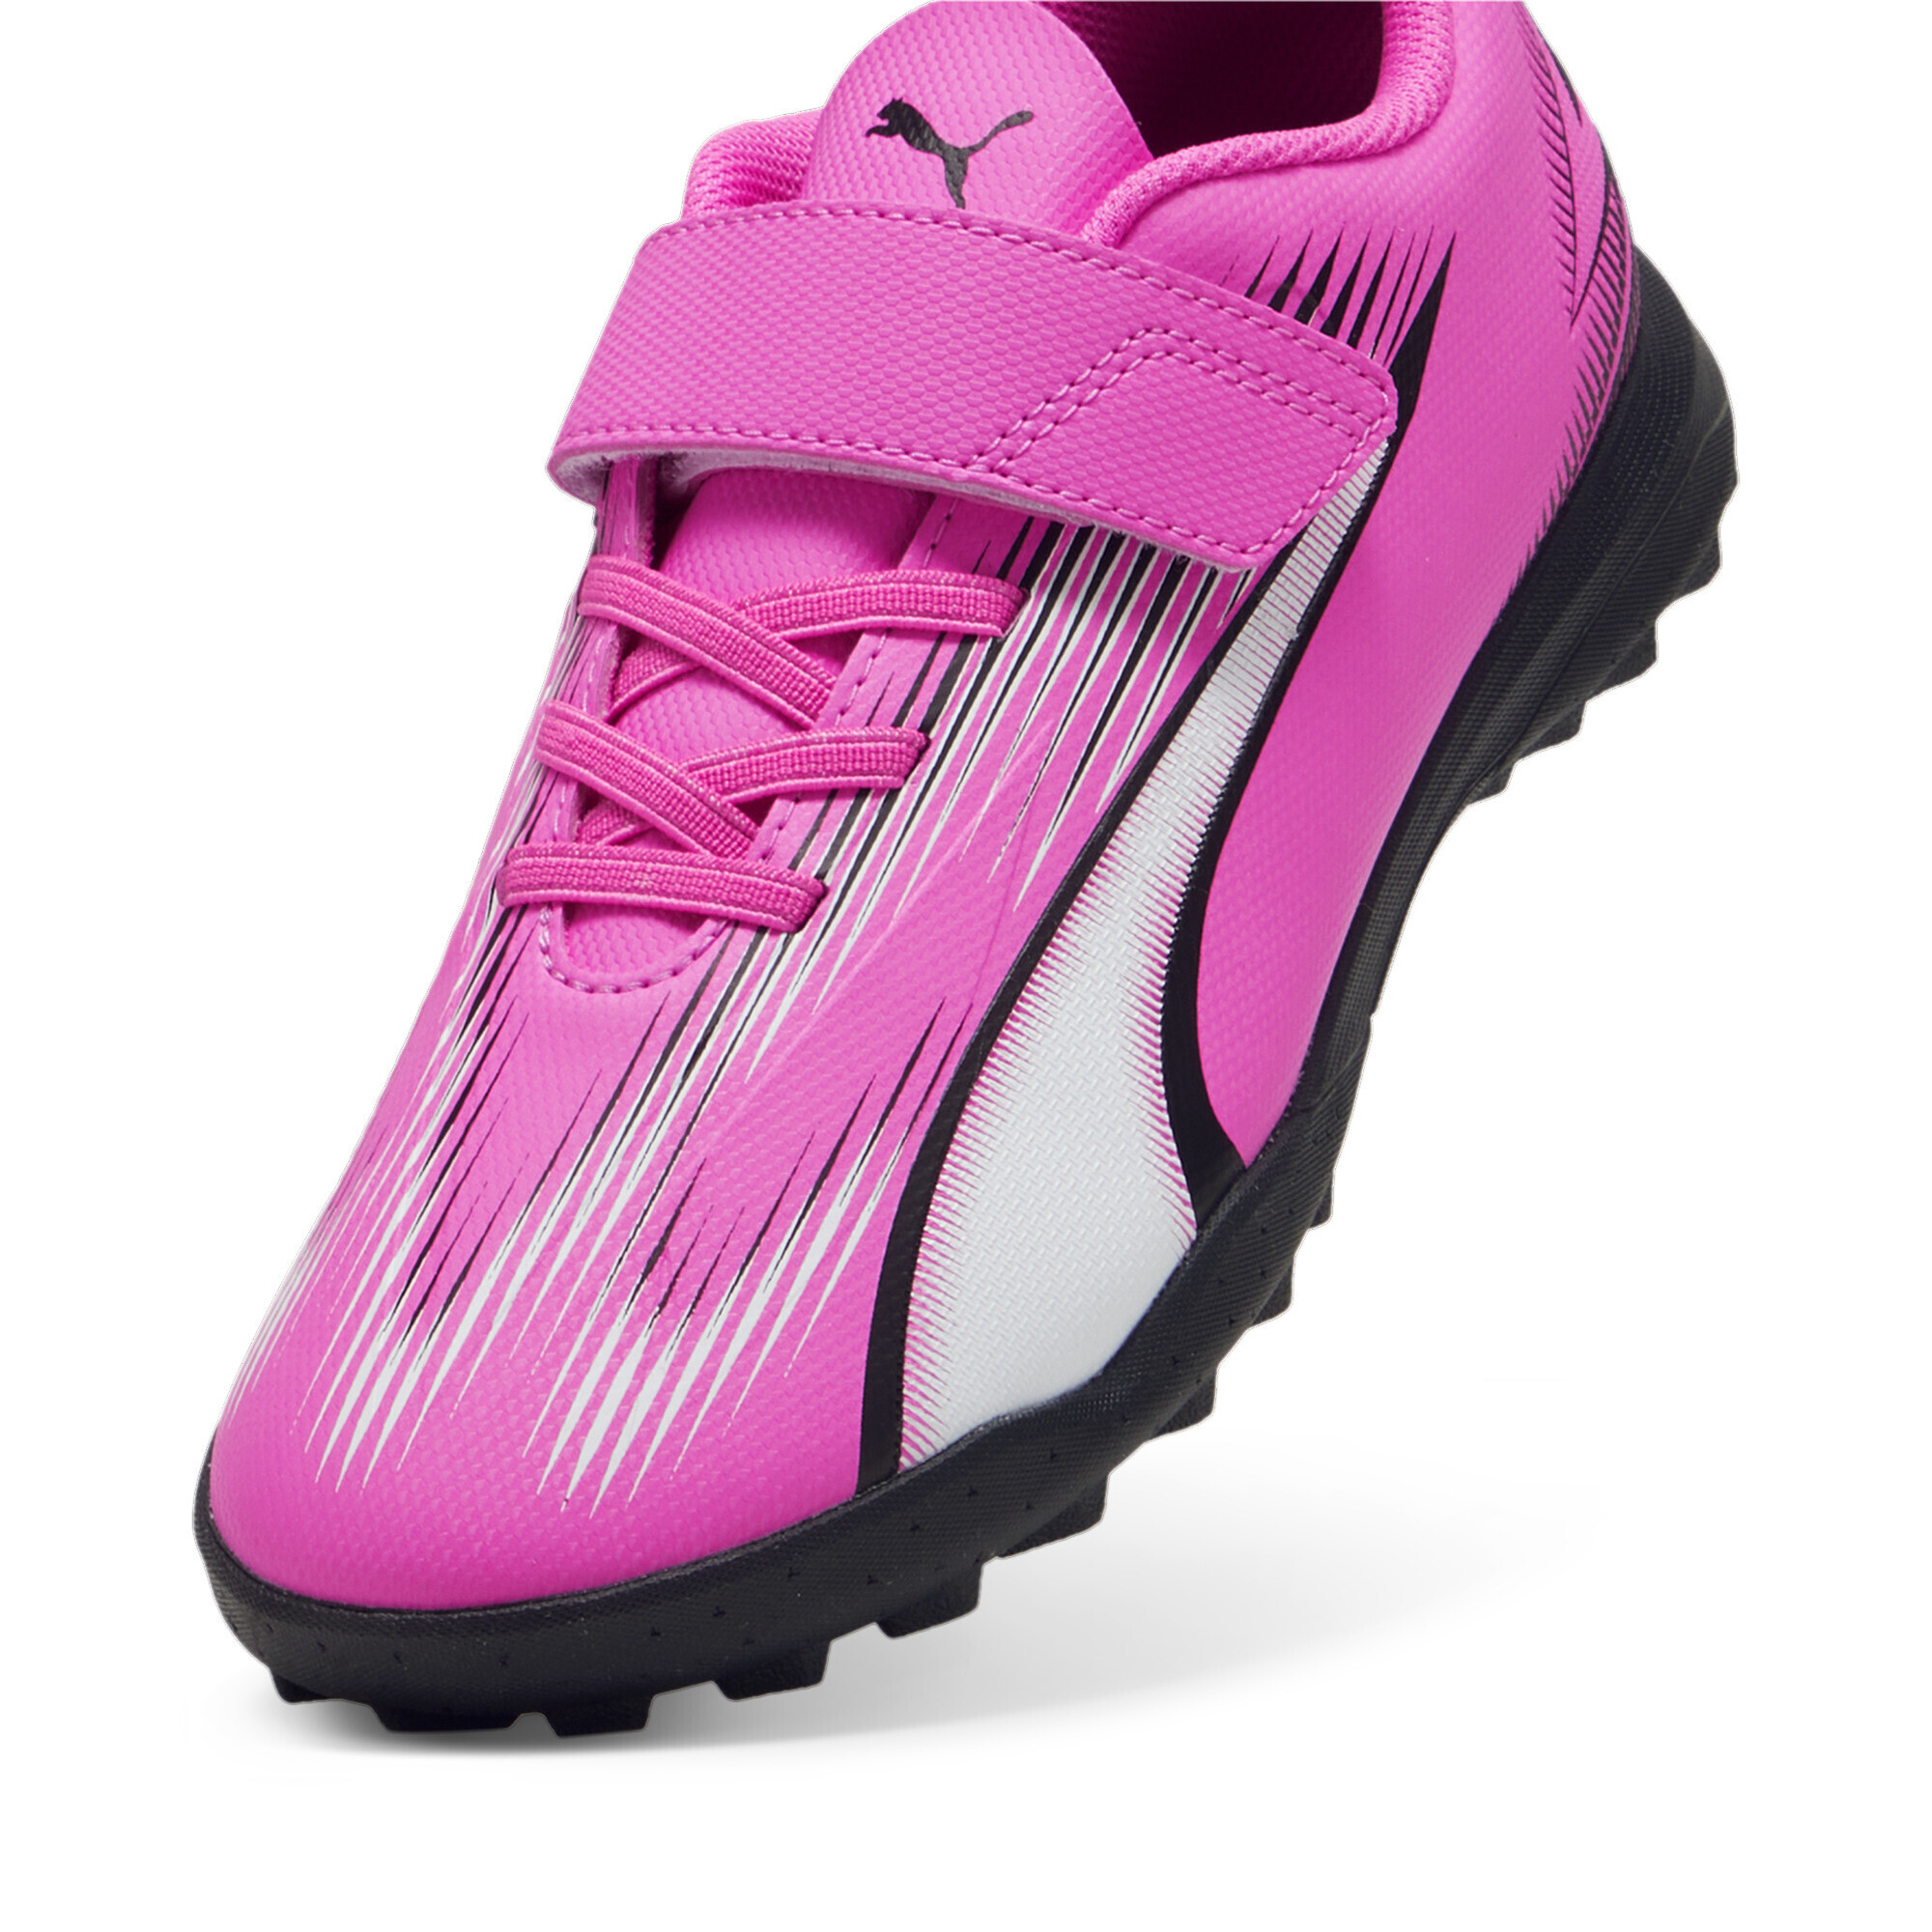 PUMA ULTRA PLAY TT Youth Football Boots In Pink, Size EU 30